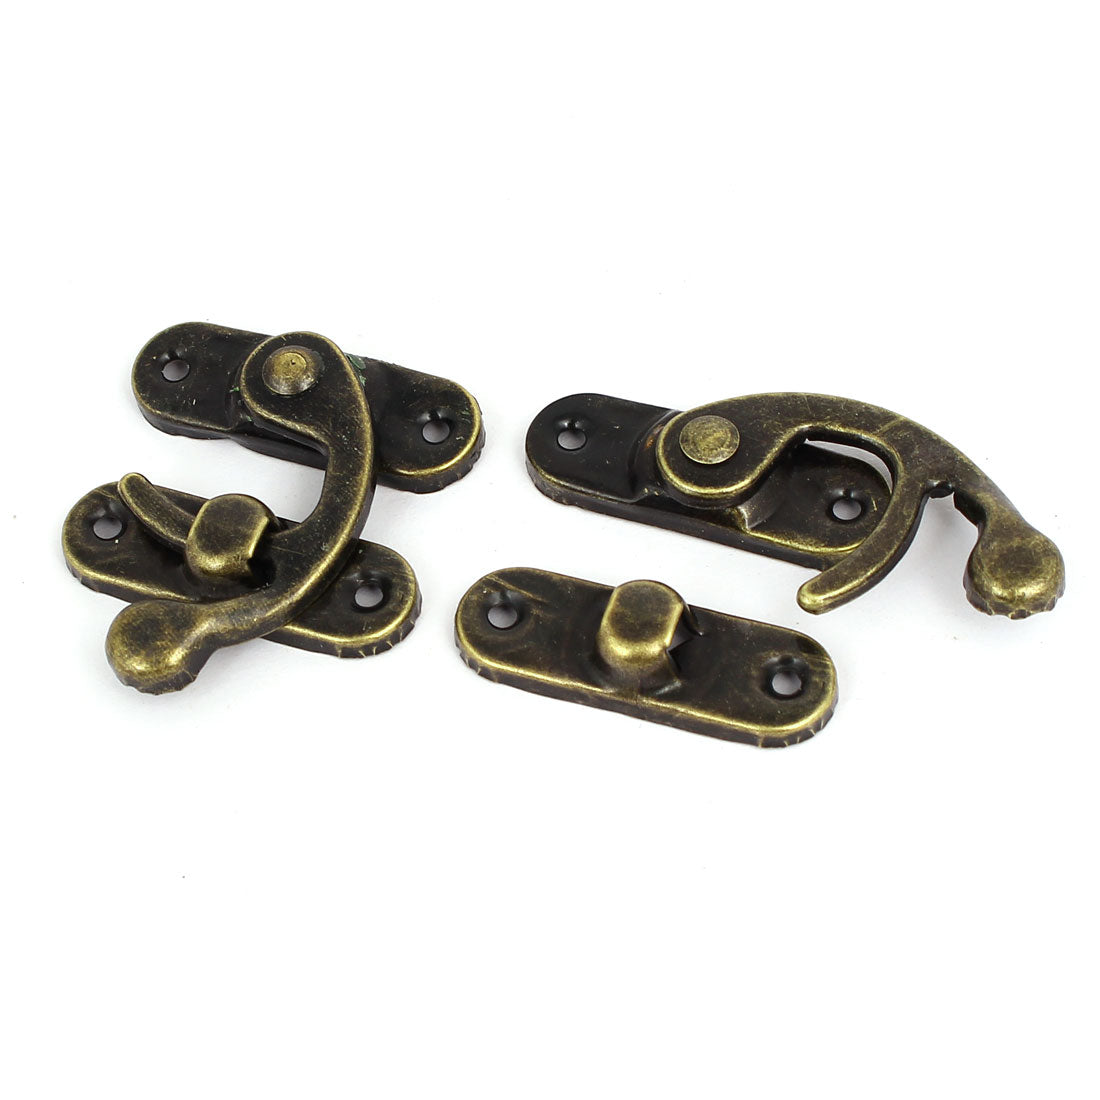 uxcell Uxcell Suitcase Box Right Swing Arm Clasp Latches Catch Toggle Hasp Bronze Tone 10PCS